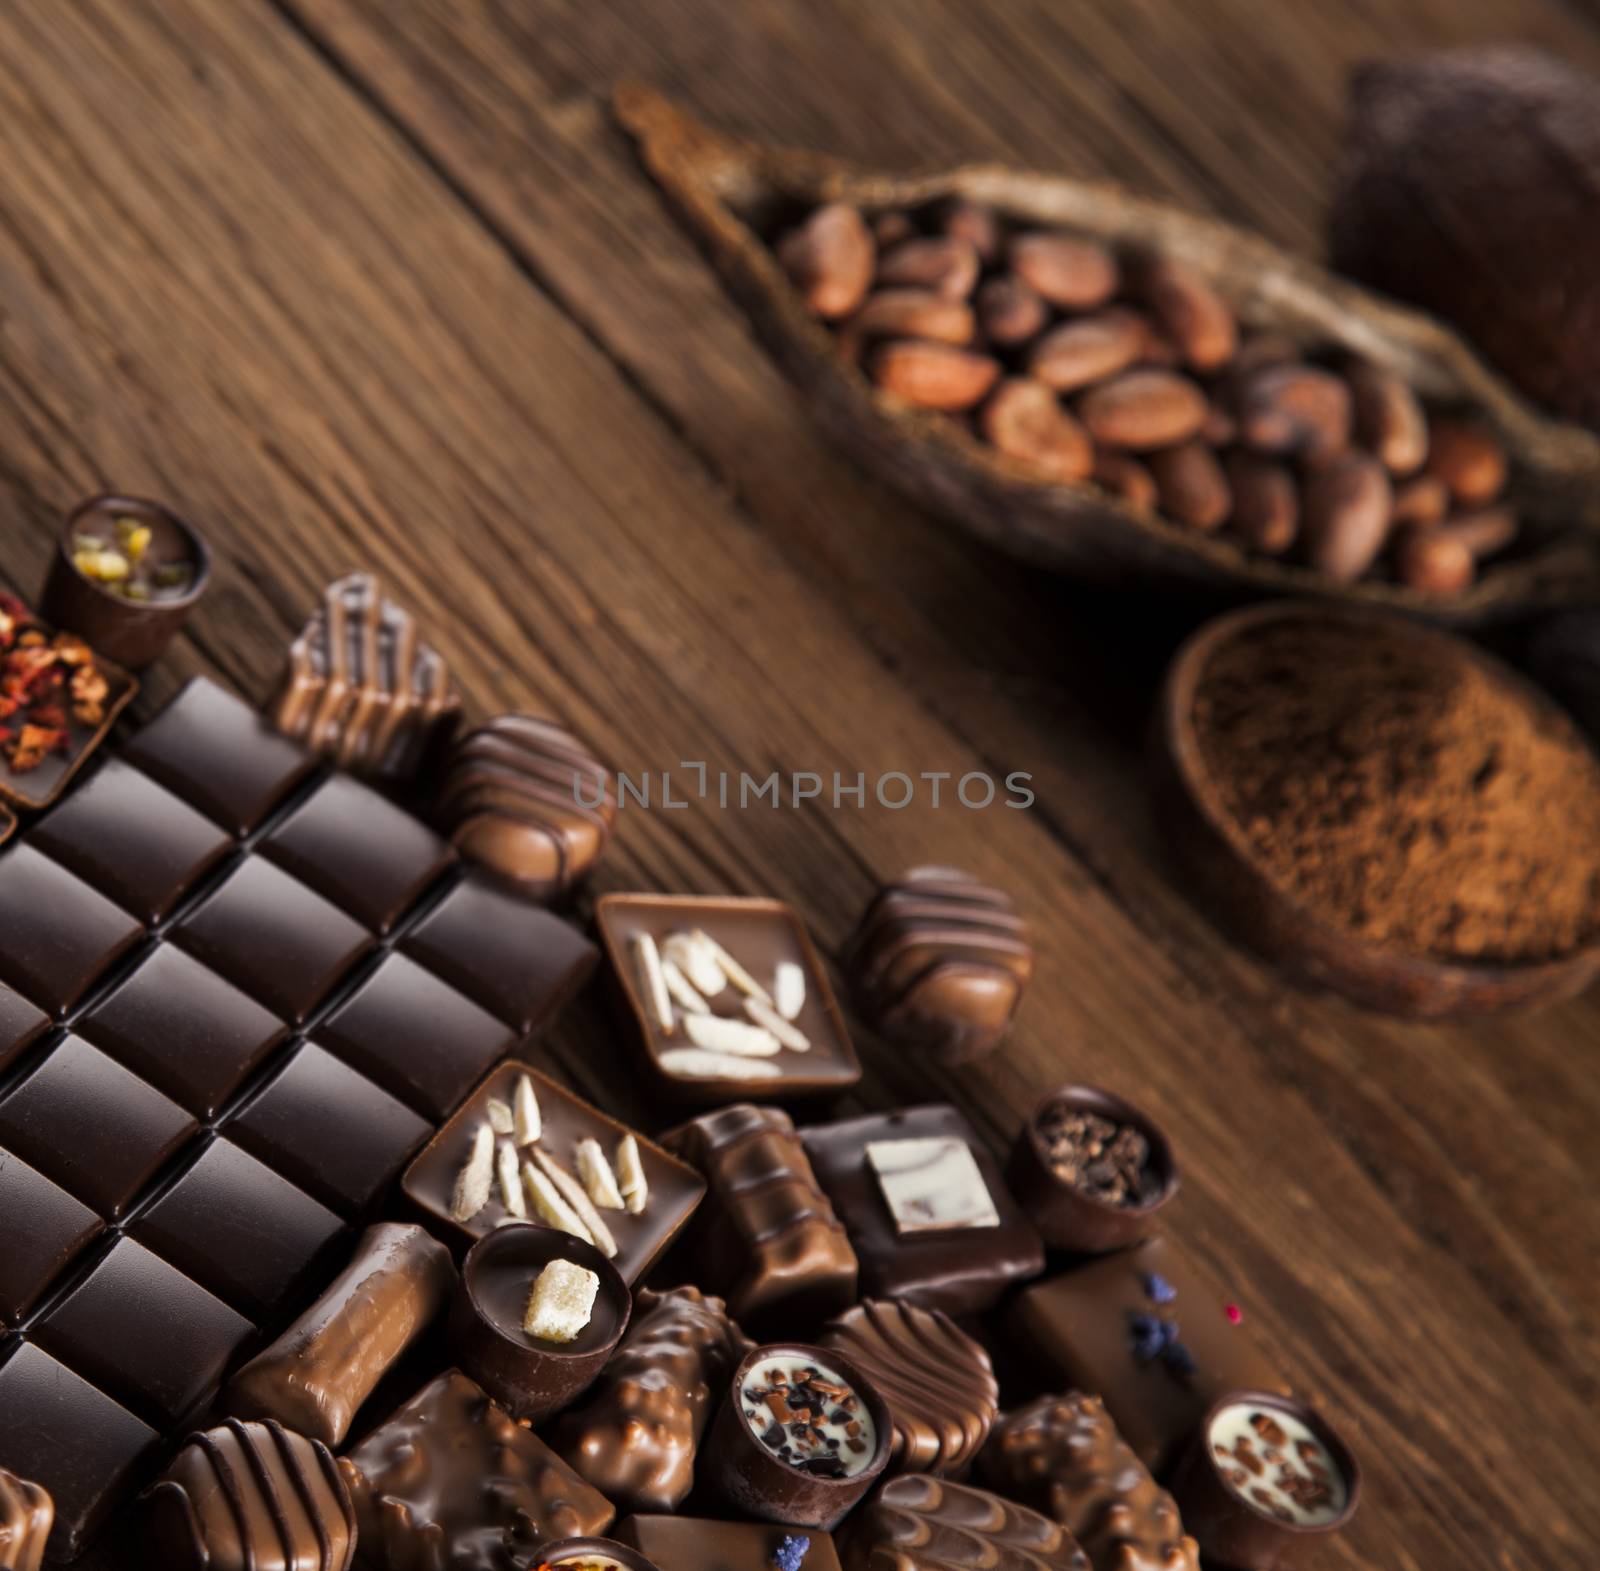 Chocolate bars and pralines on wooden background by JanPietruszka